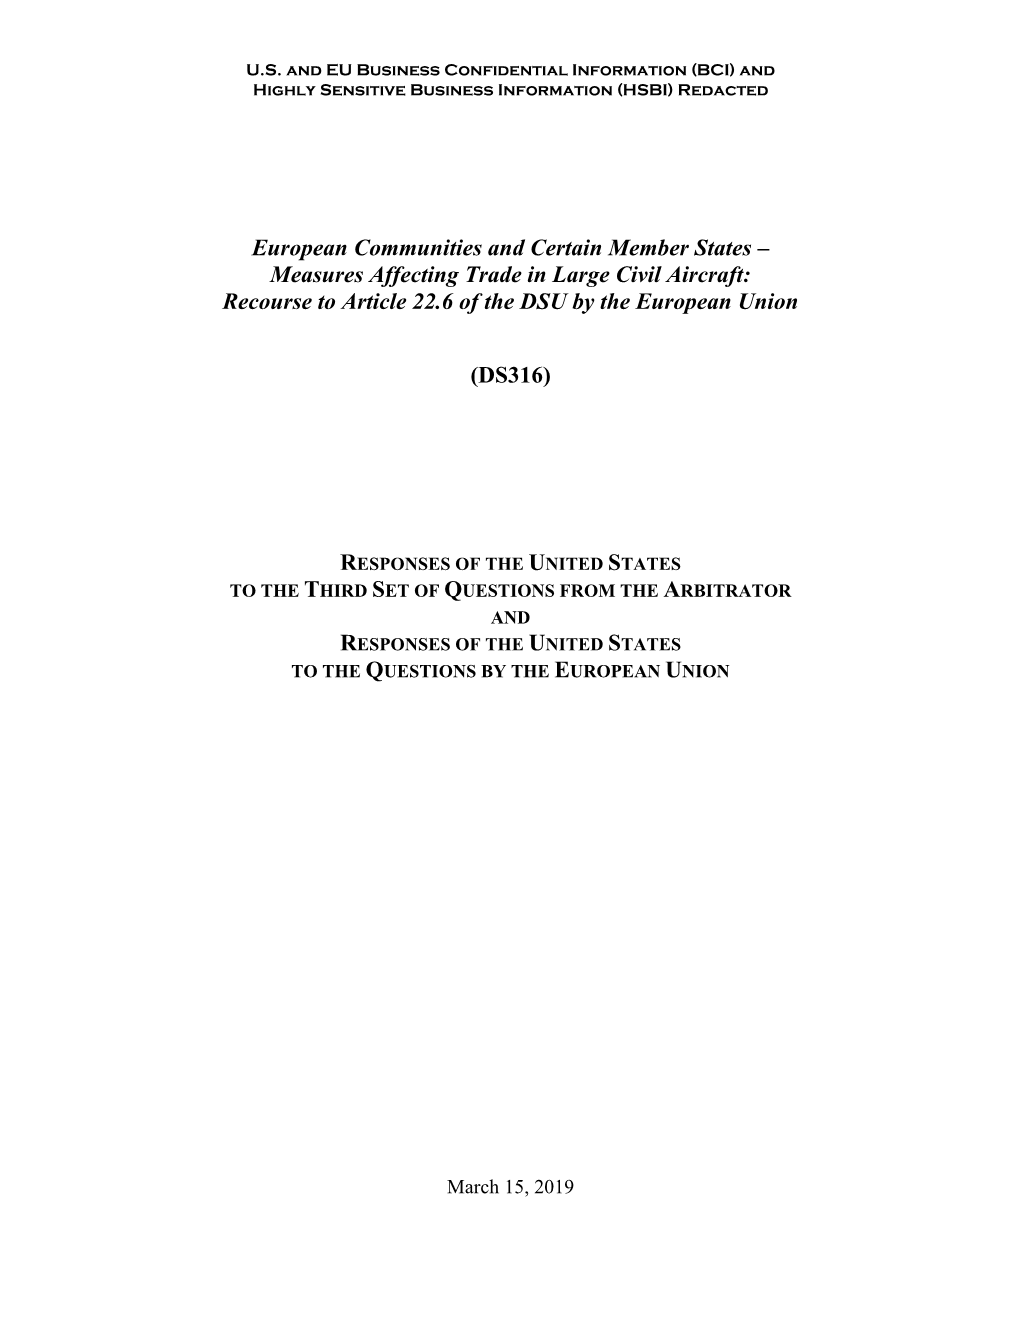 Measures Affecting Trade in Large Civil Aircraft: Recourse to Article 22.6 of the DSU by the European Union